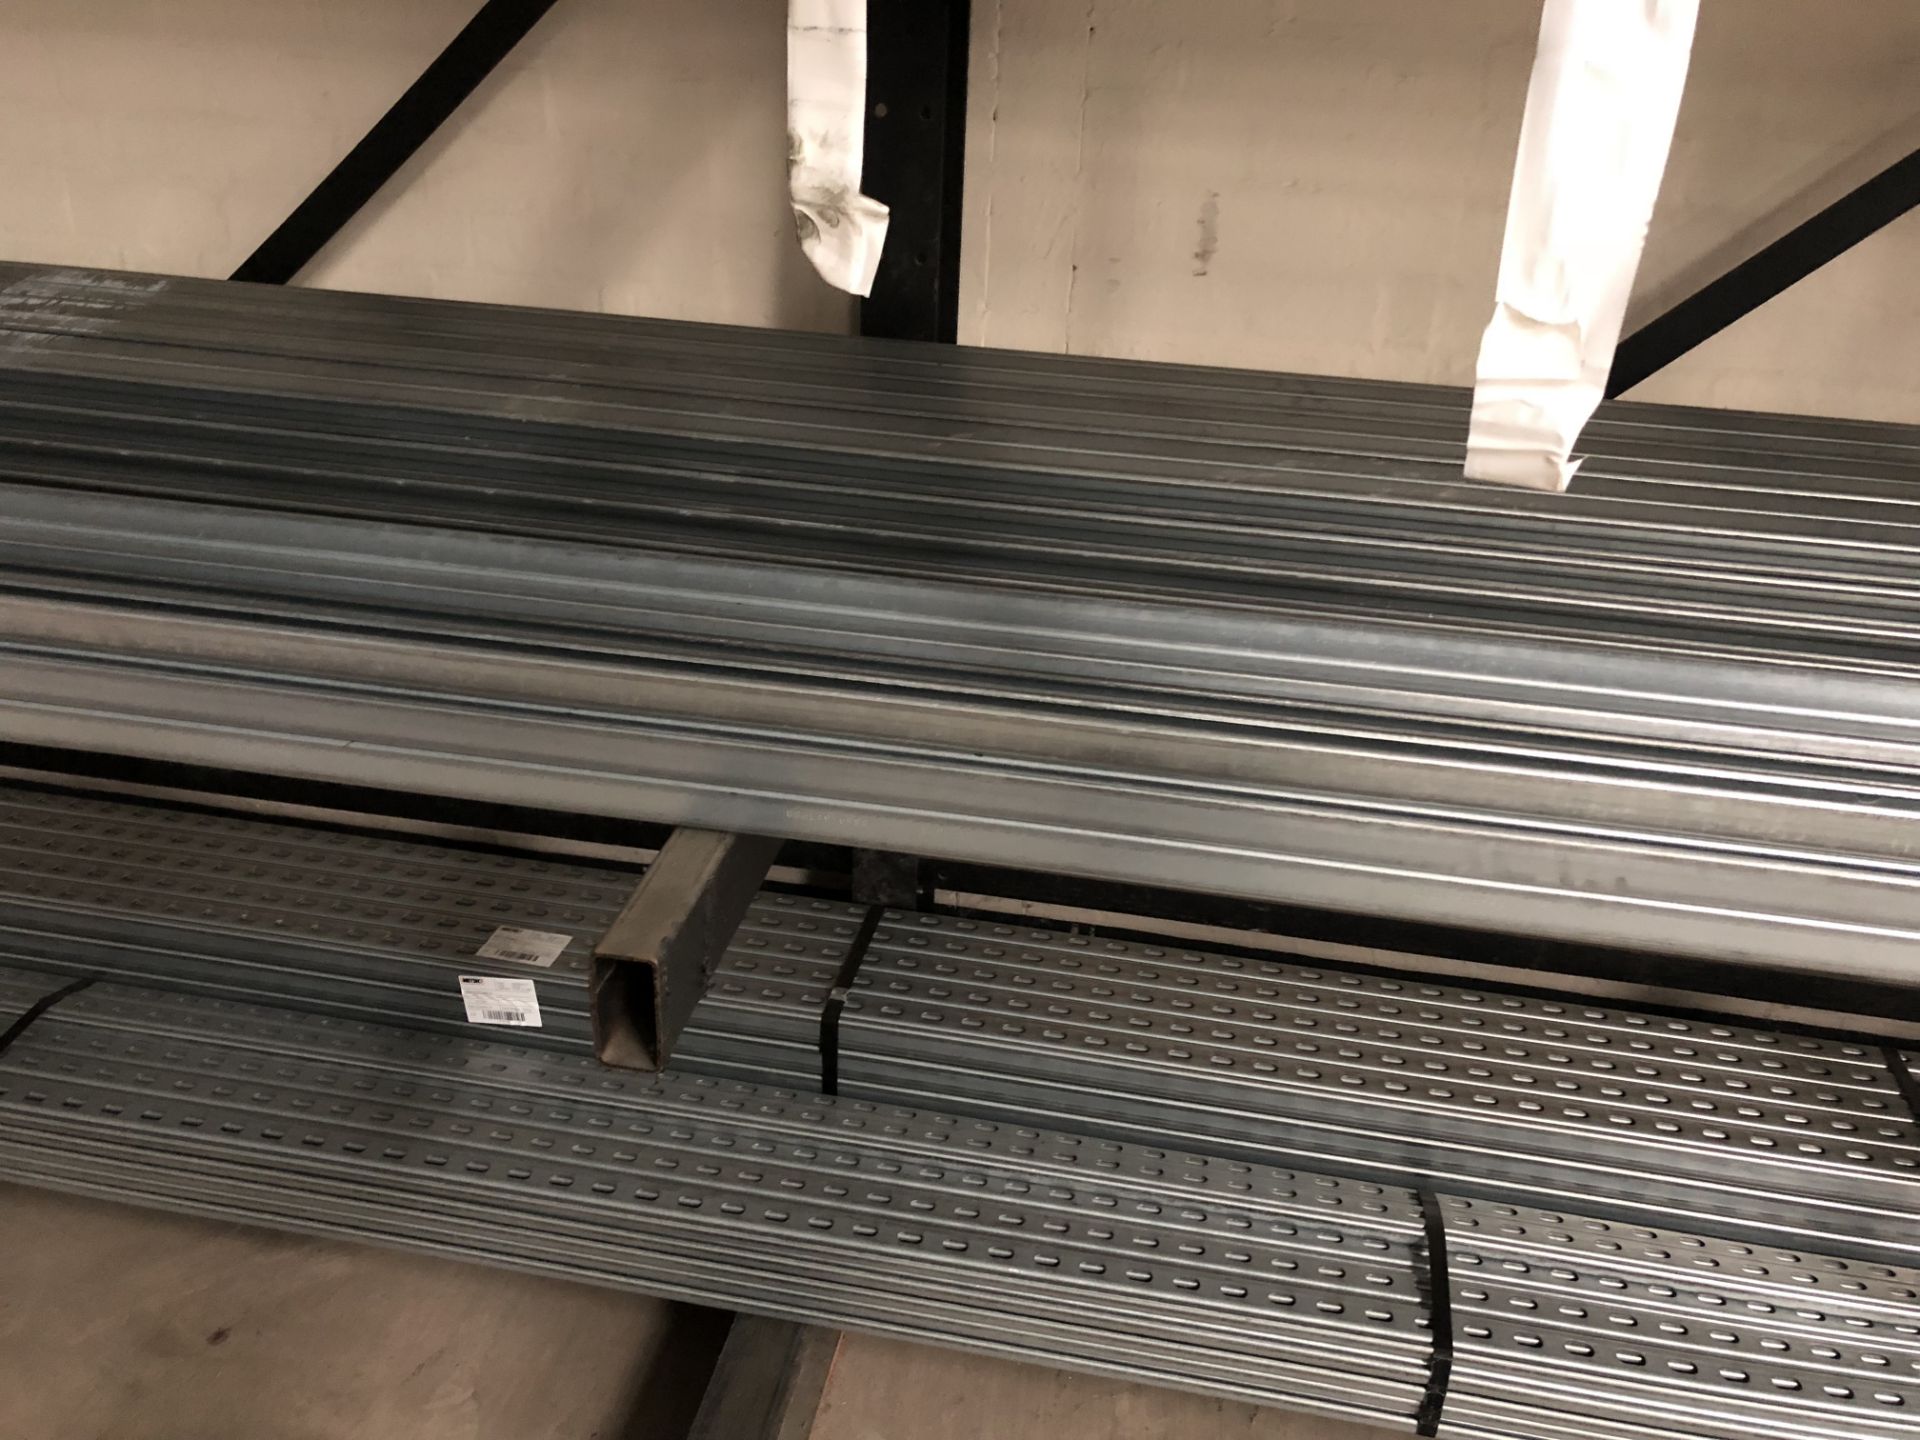 Quantity steel Cable Management Channel/Conduit, to stock rack (located in Bay 4) - Image 3 of 5